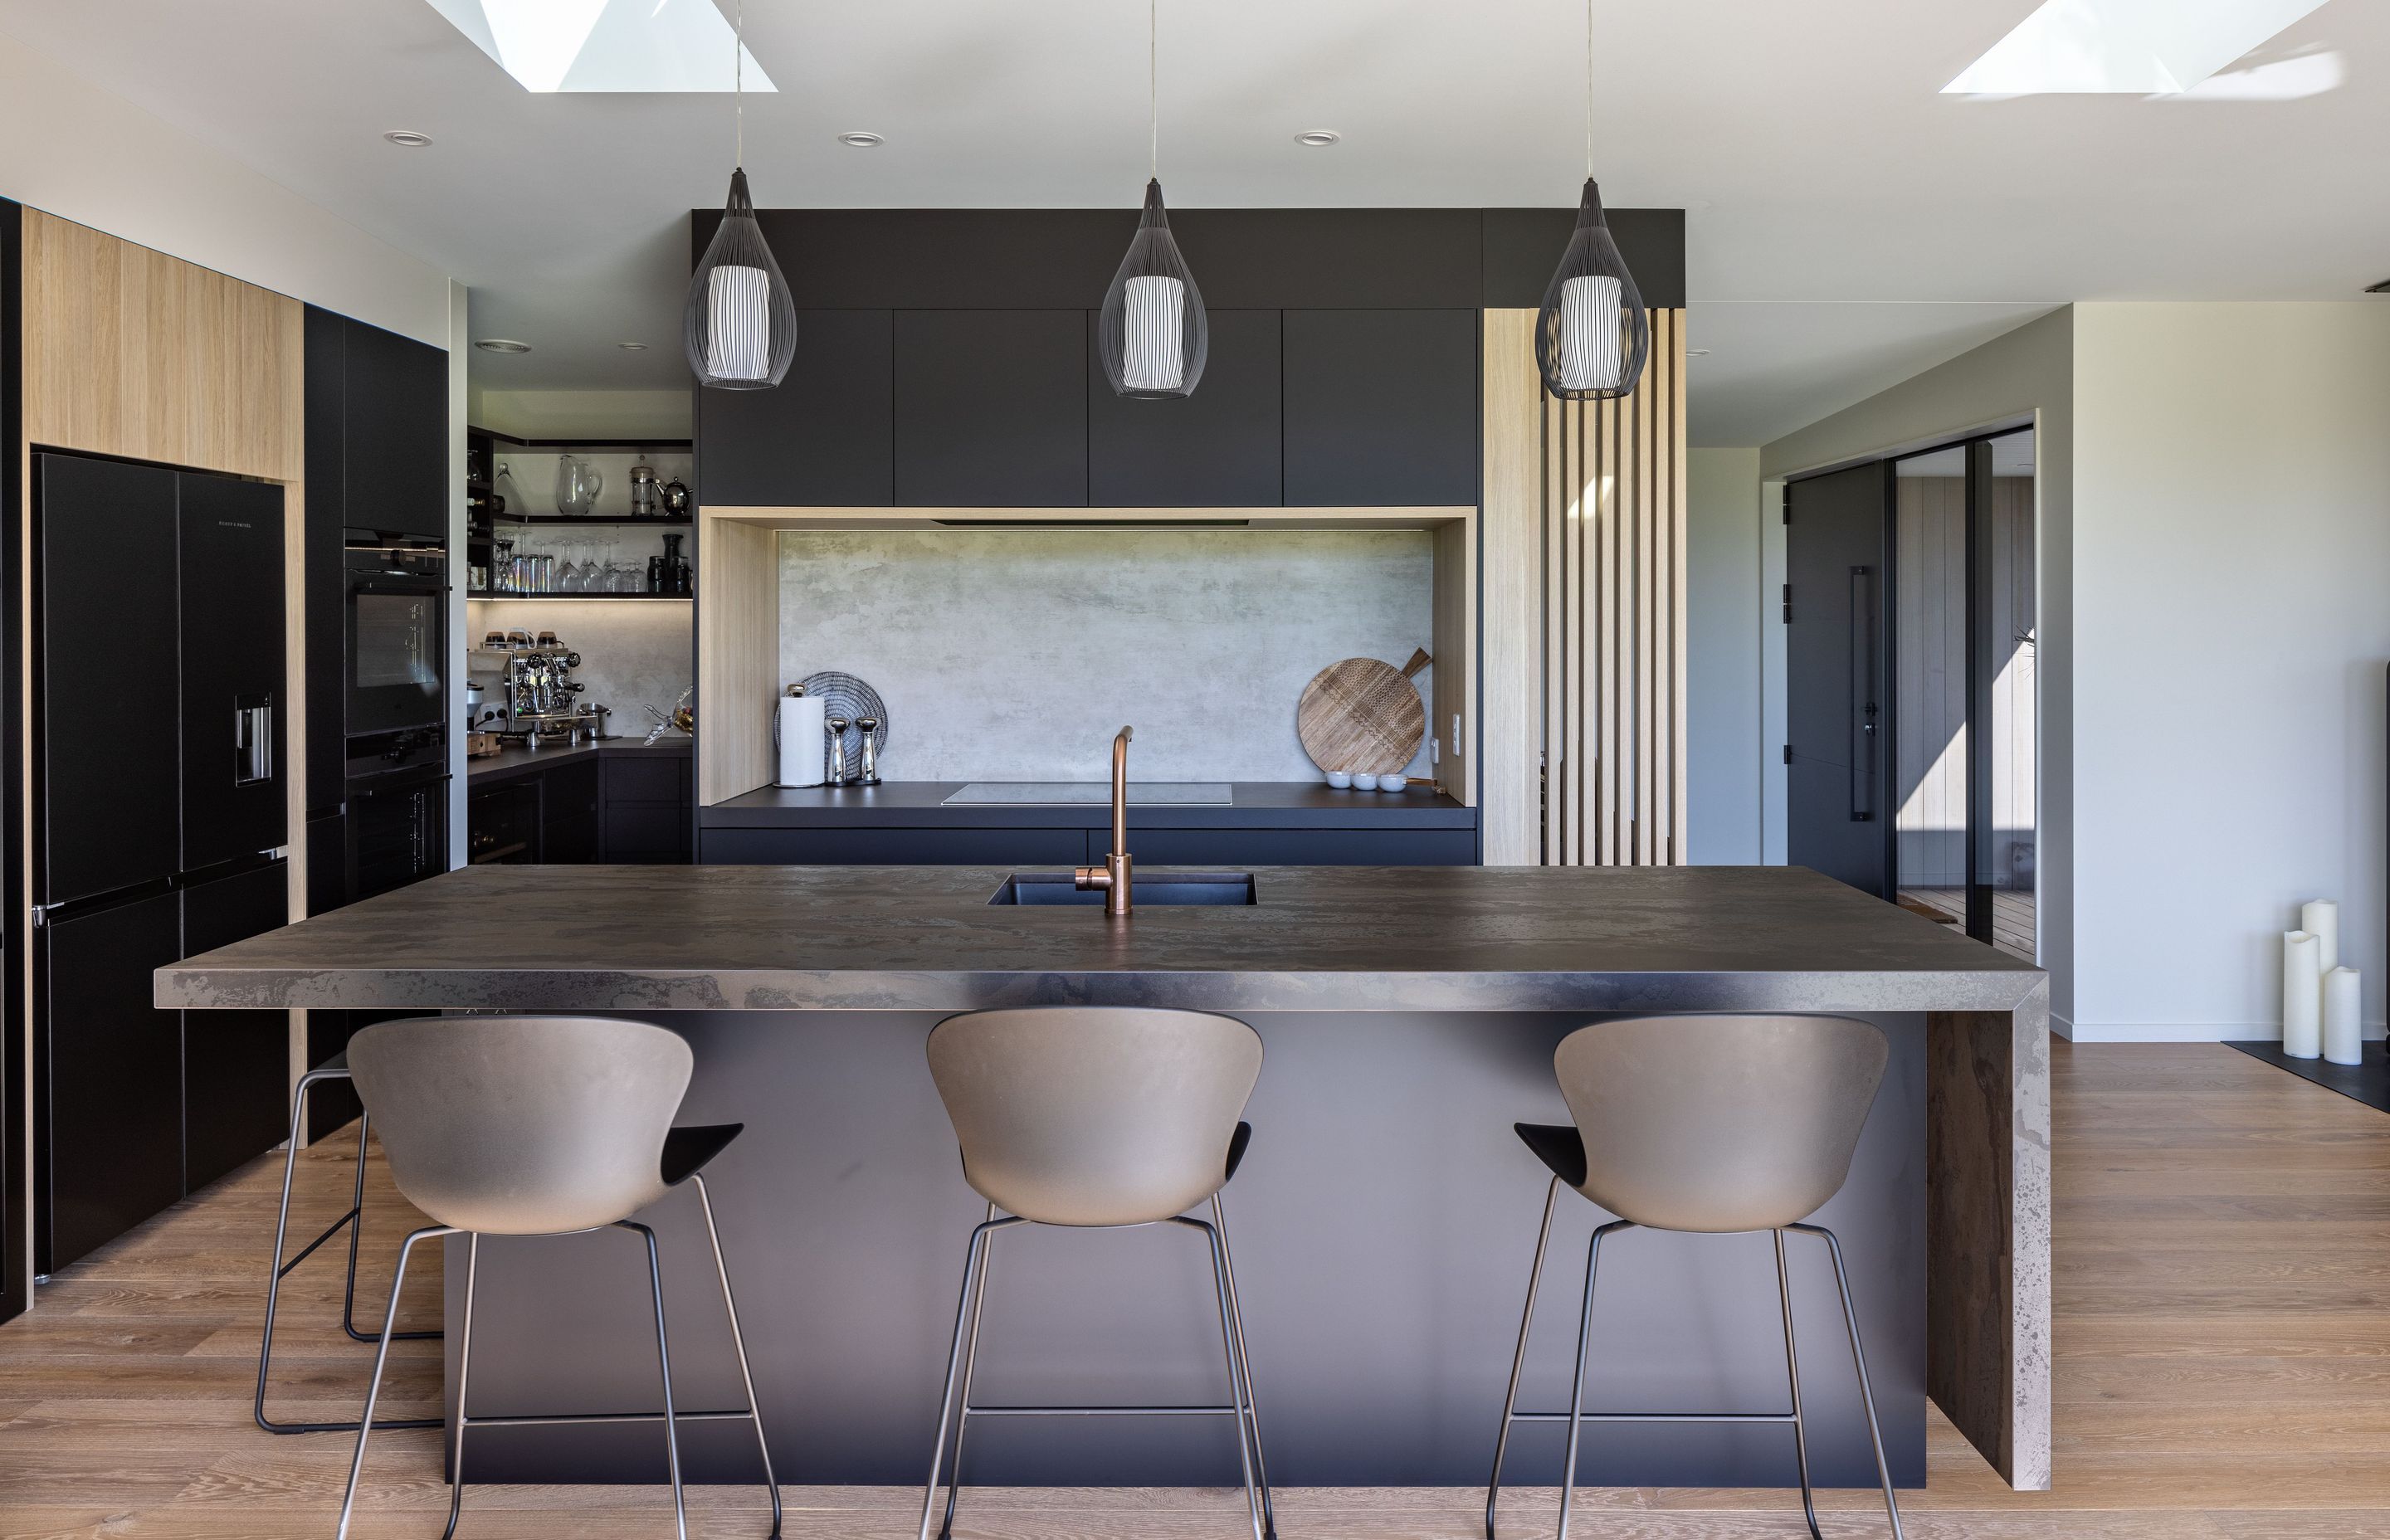 The kitchen as pictured in a recent DRH project, the Waitarere Beach House.